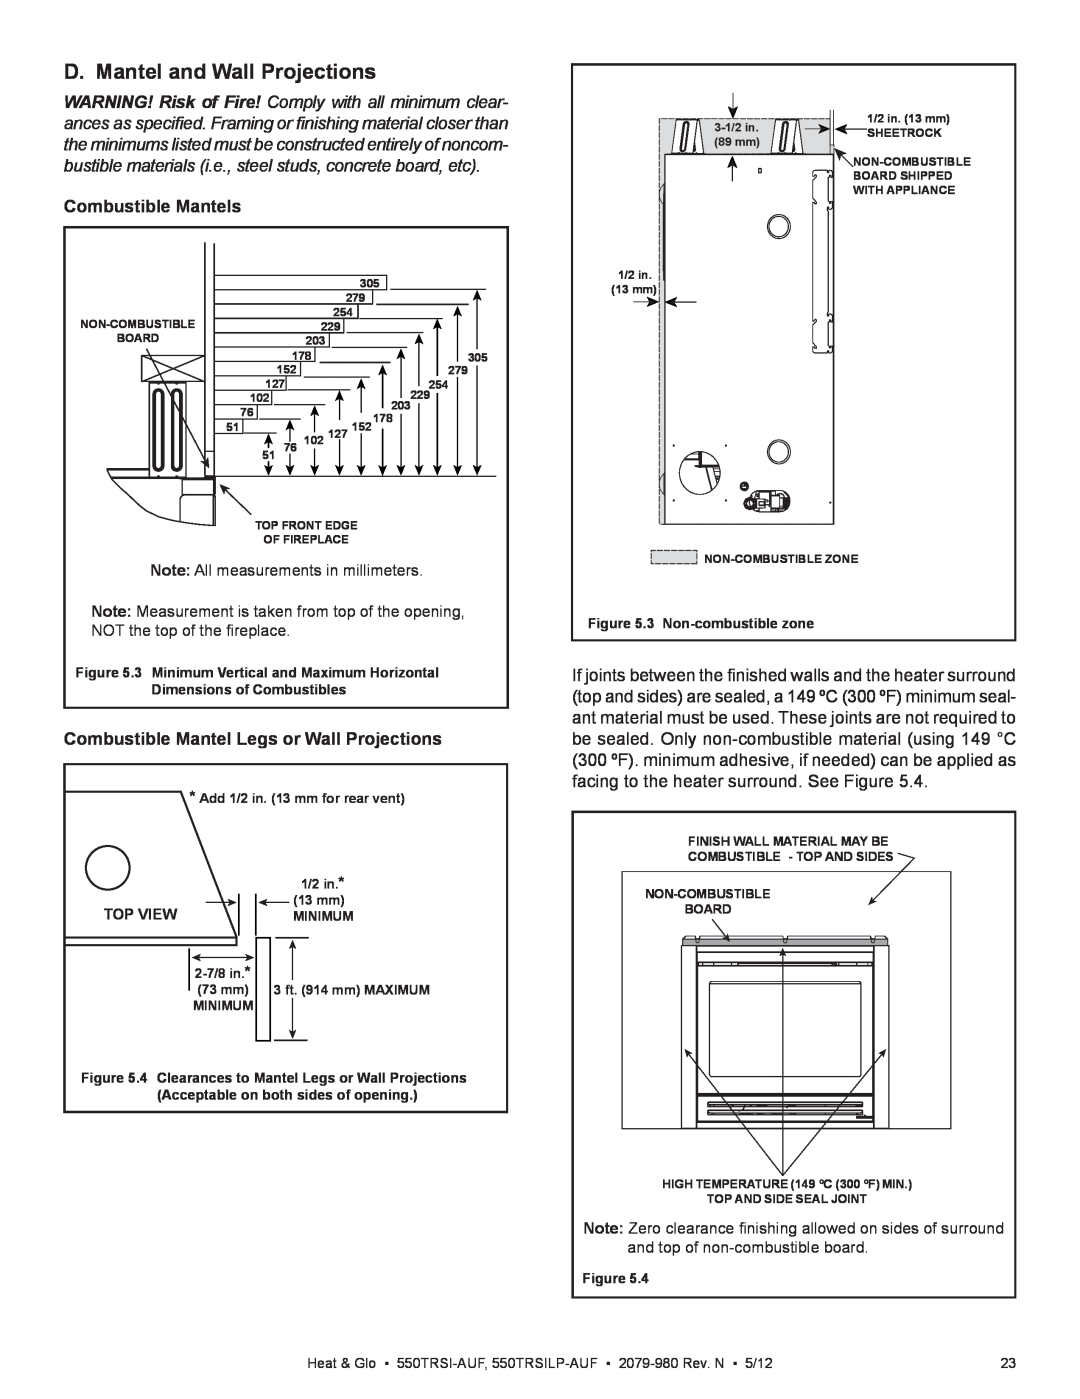 Heat & Glo LifeStyle 550TRSI-AUF owner manual D. Mantel and Wall Projections, Combustible Mantels 